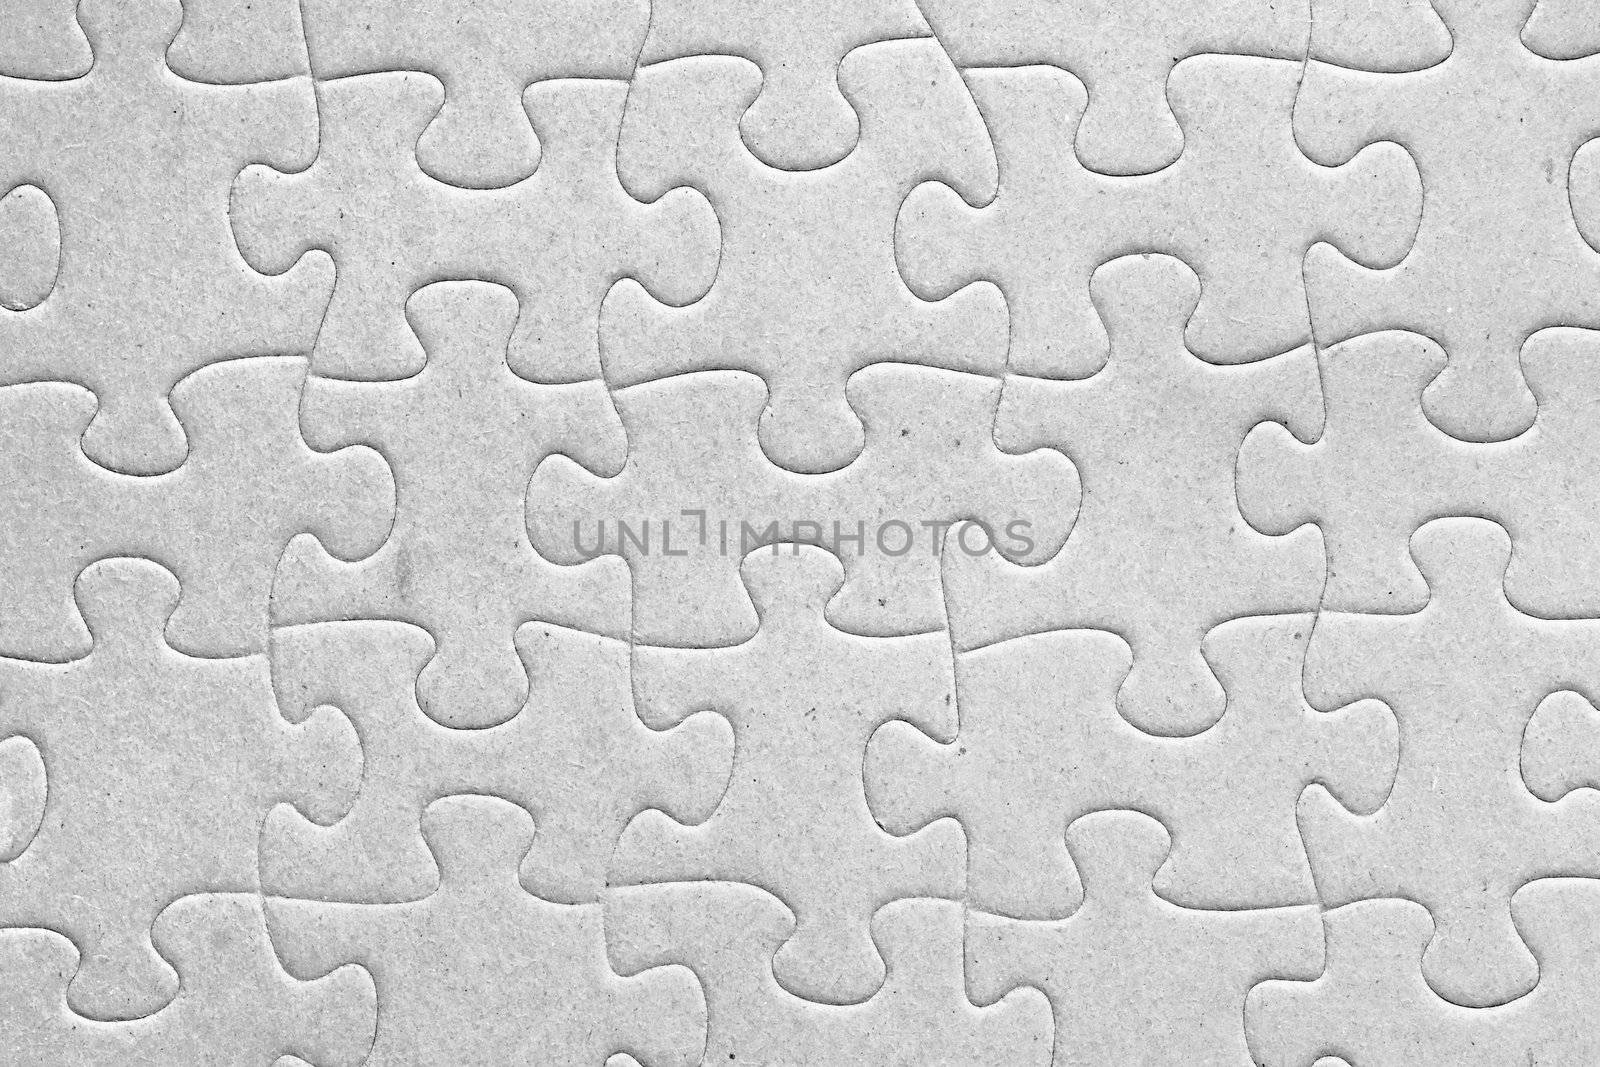 Unity:blank grey jigsaw puzzle pieces all connected, great details of textured cardboard material